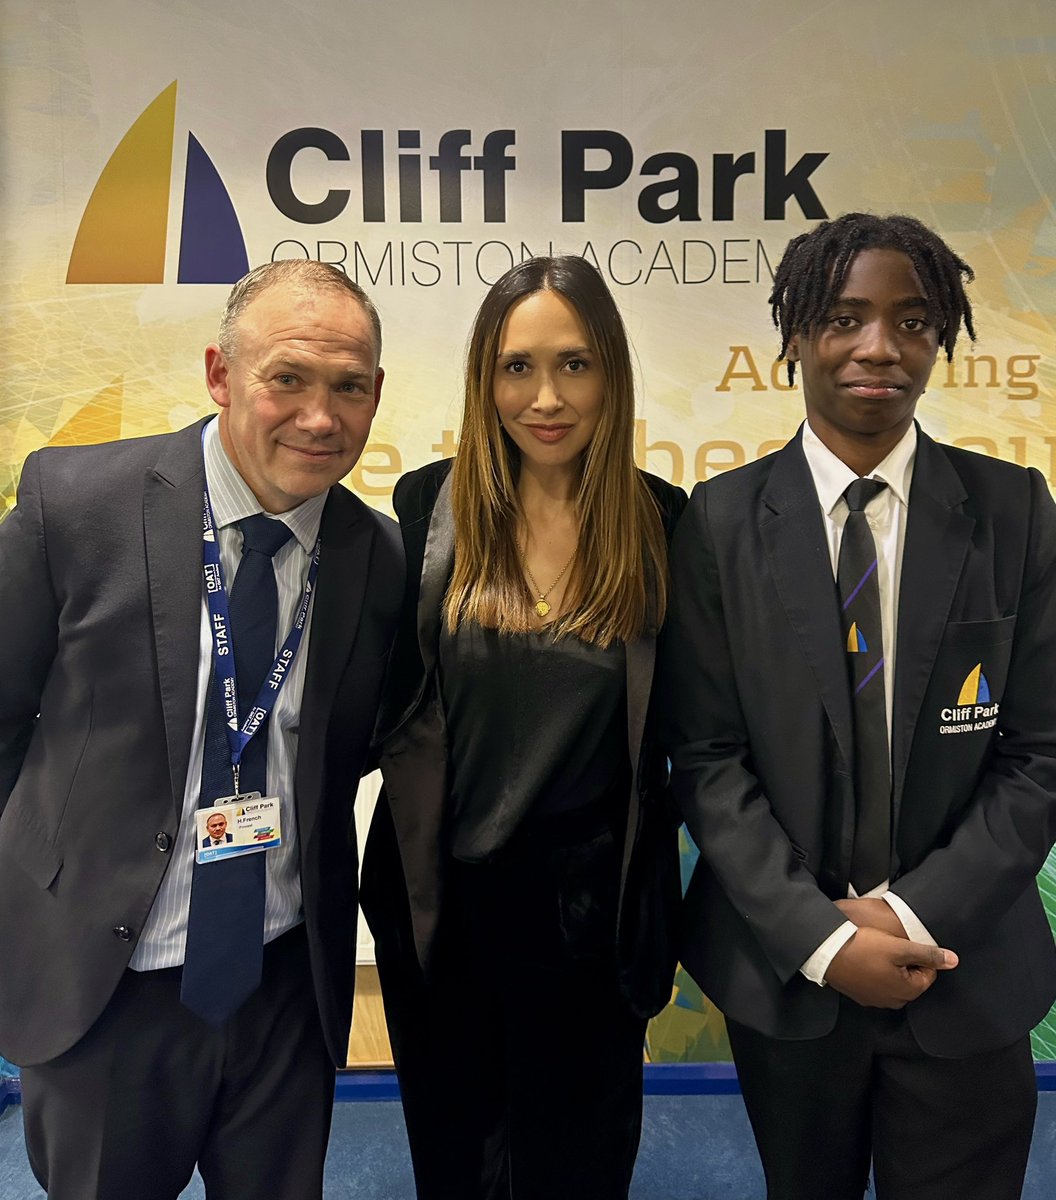 Awards evening at my old school @CliffParkOA. I’m a personal mentor there after @uniofeastanglia started their ‘outpost’ work in the area. It was amazing to see my mentee, Jadon, perform brilliantly last night. Thank you to Head Harry French and all at Cliff Park for having me.